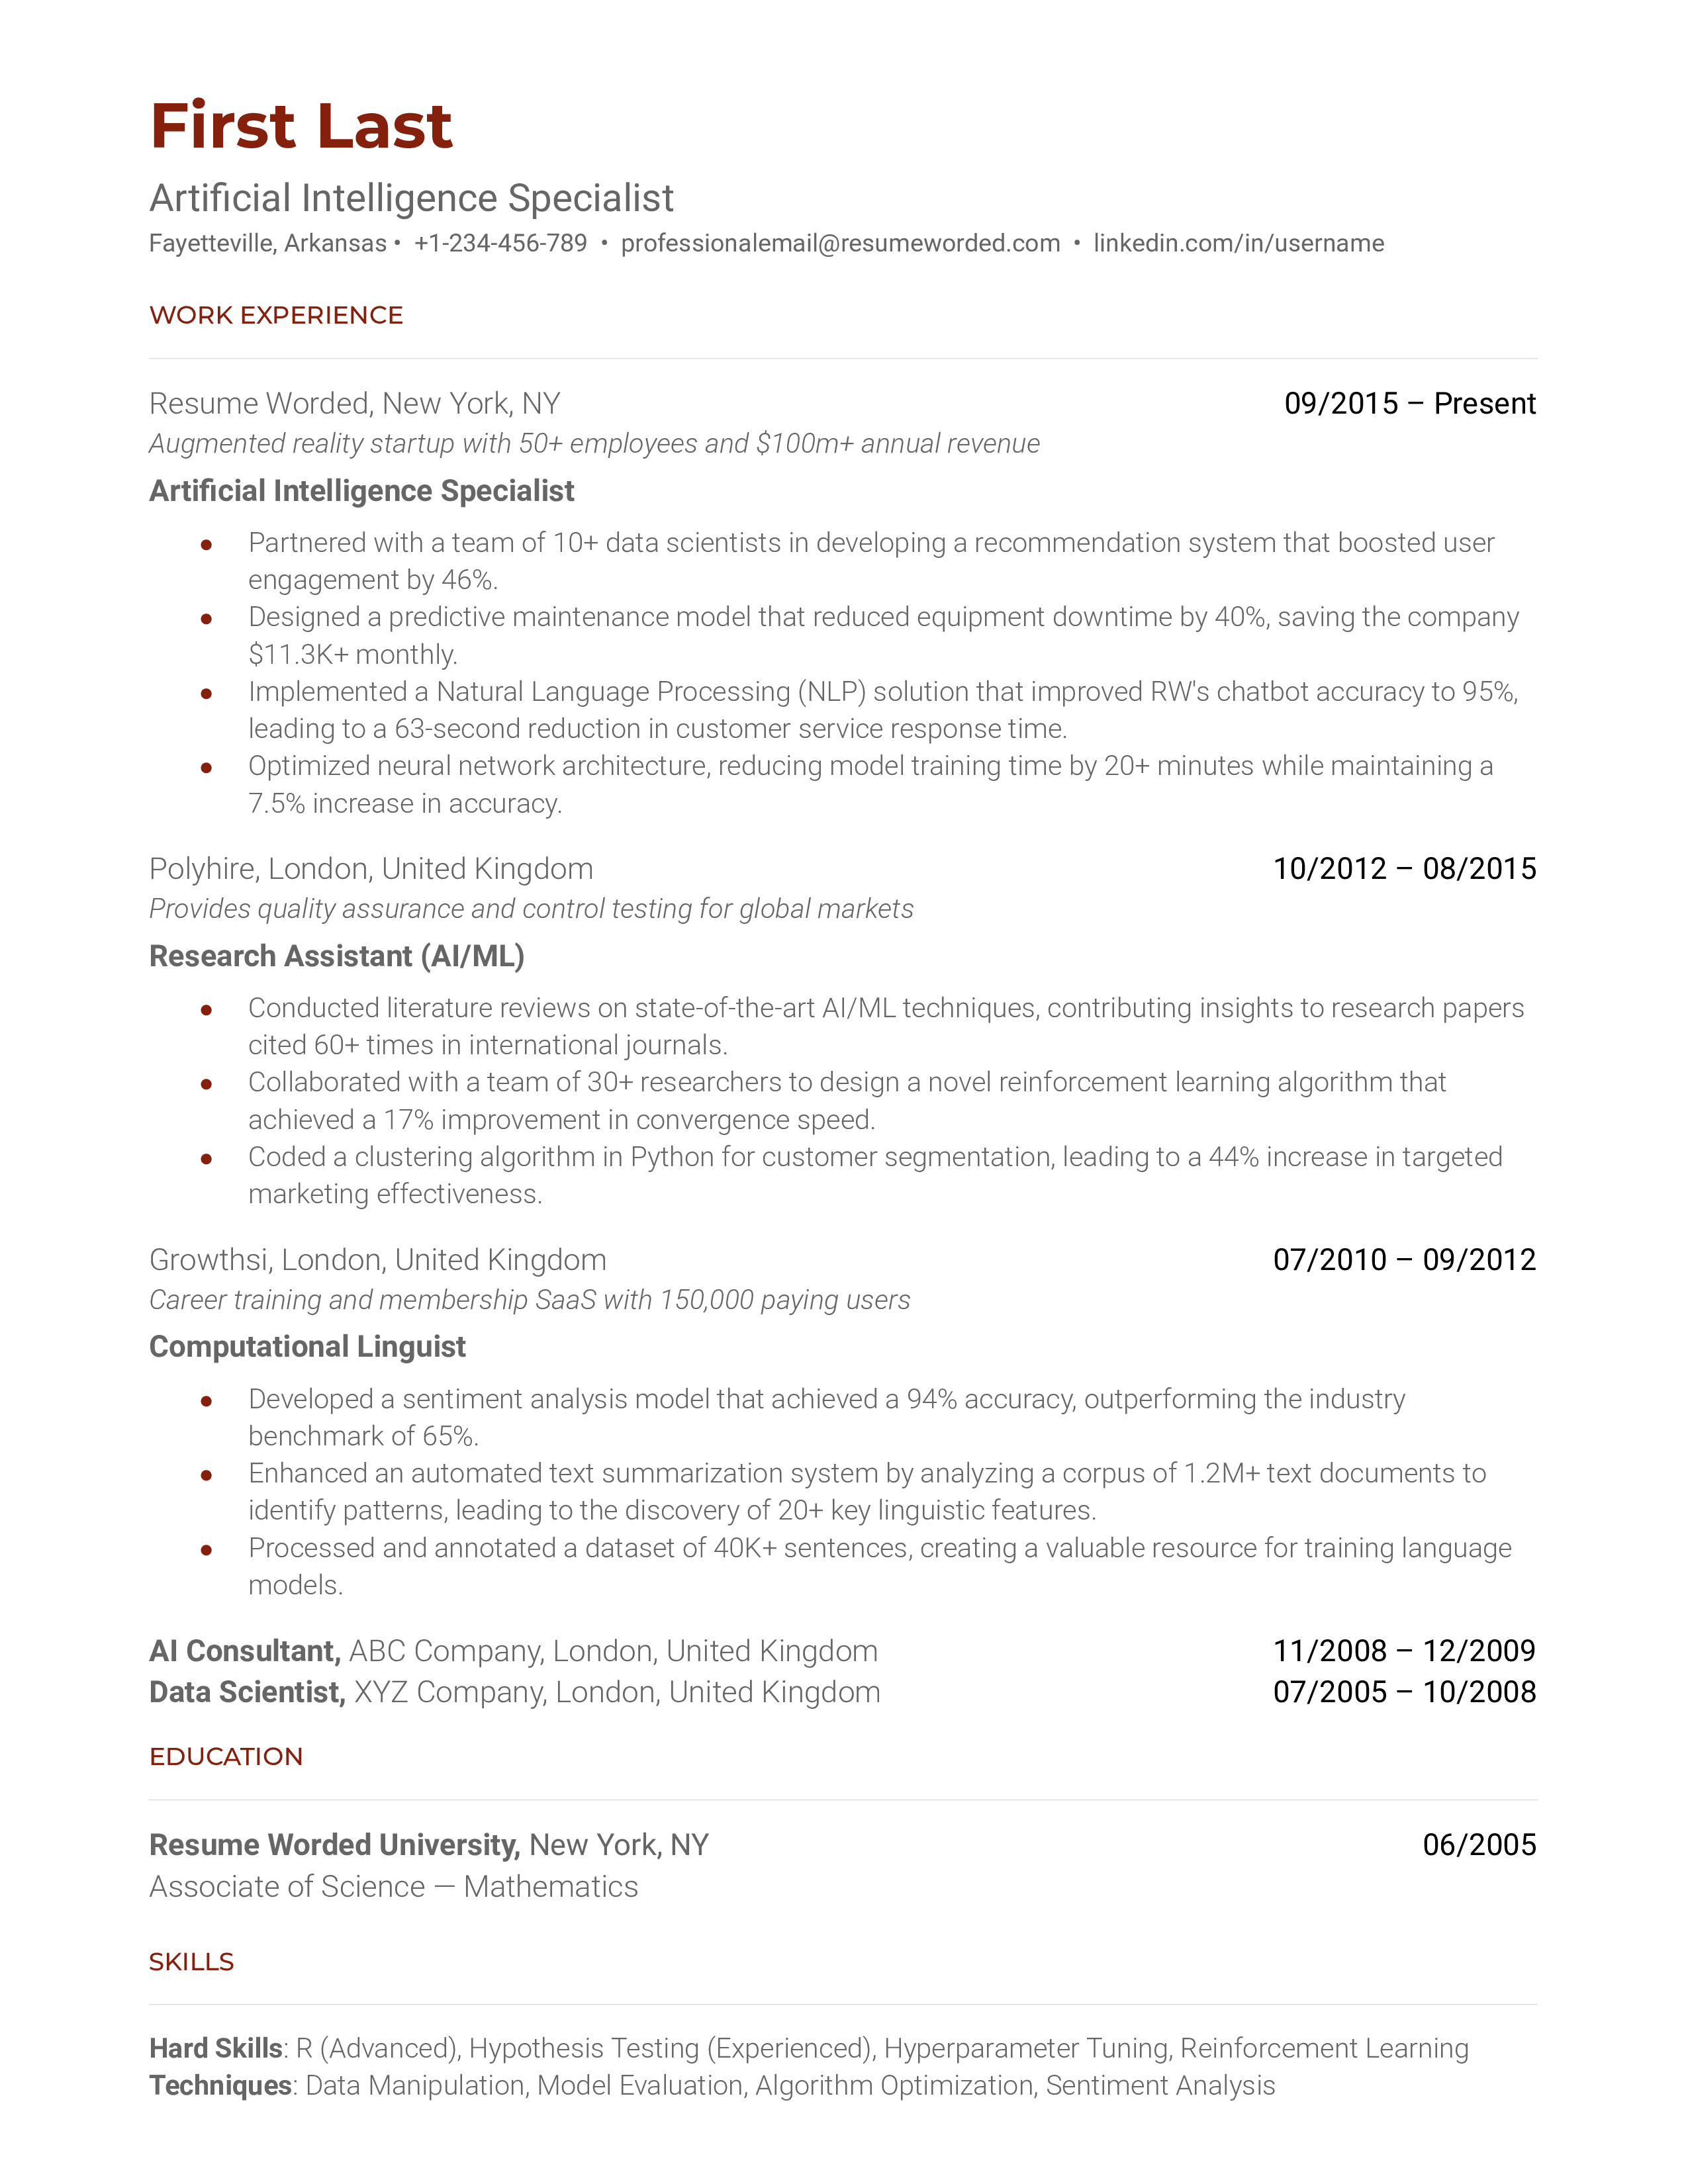 Artificial Intelligence Specialist Resume Sample